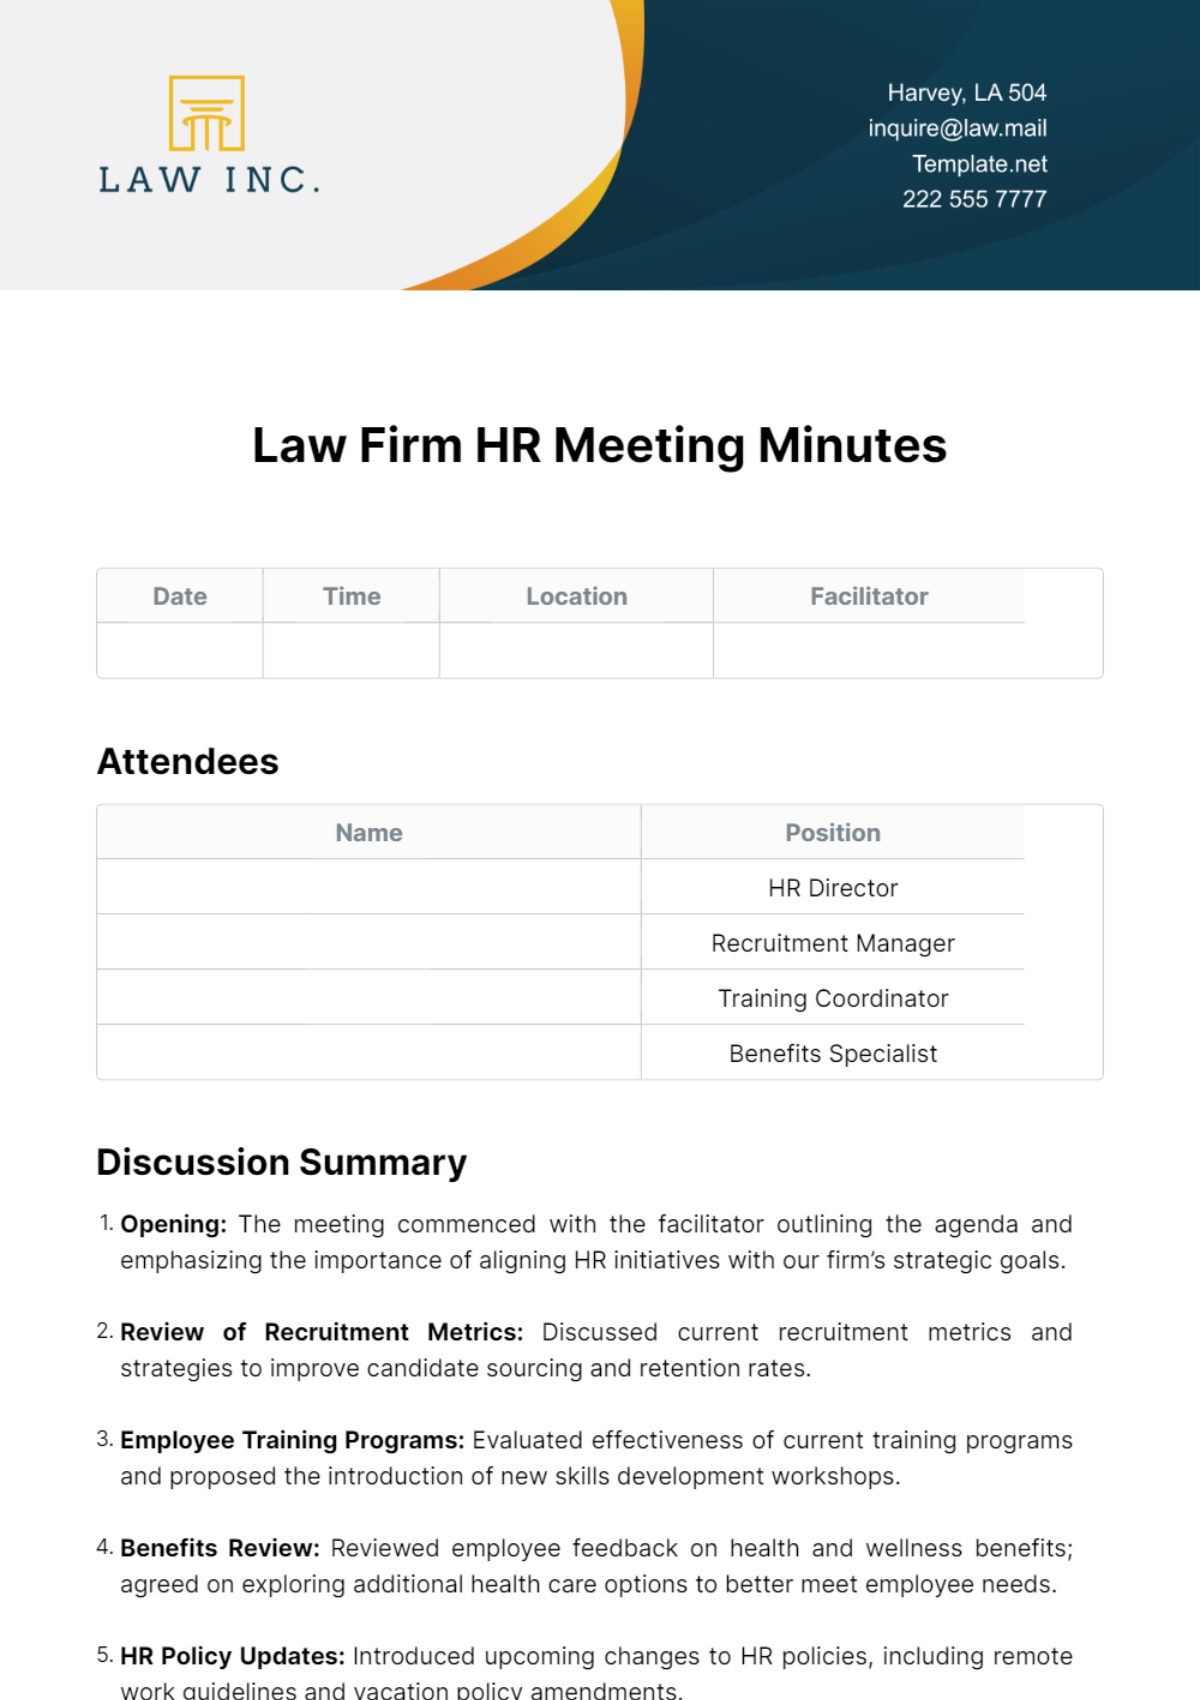 Law Firm HR Meeting Minutes Template